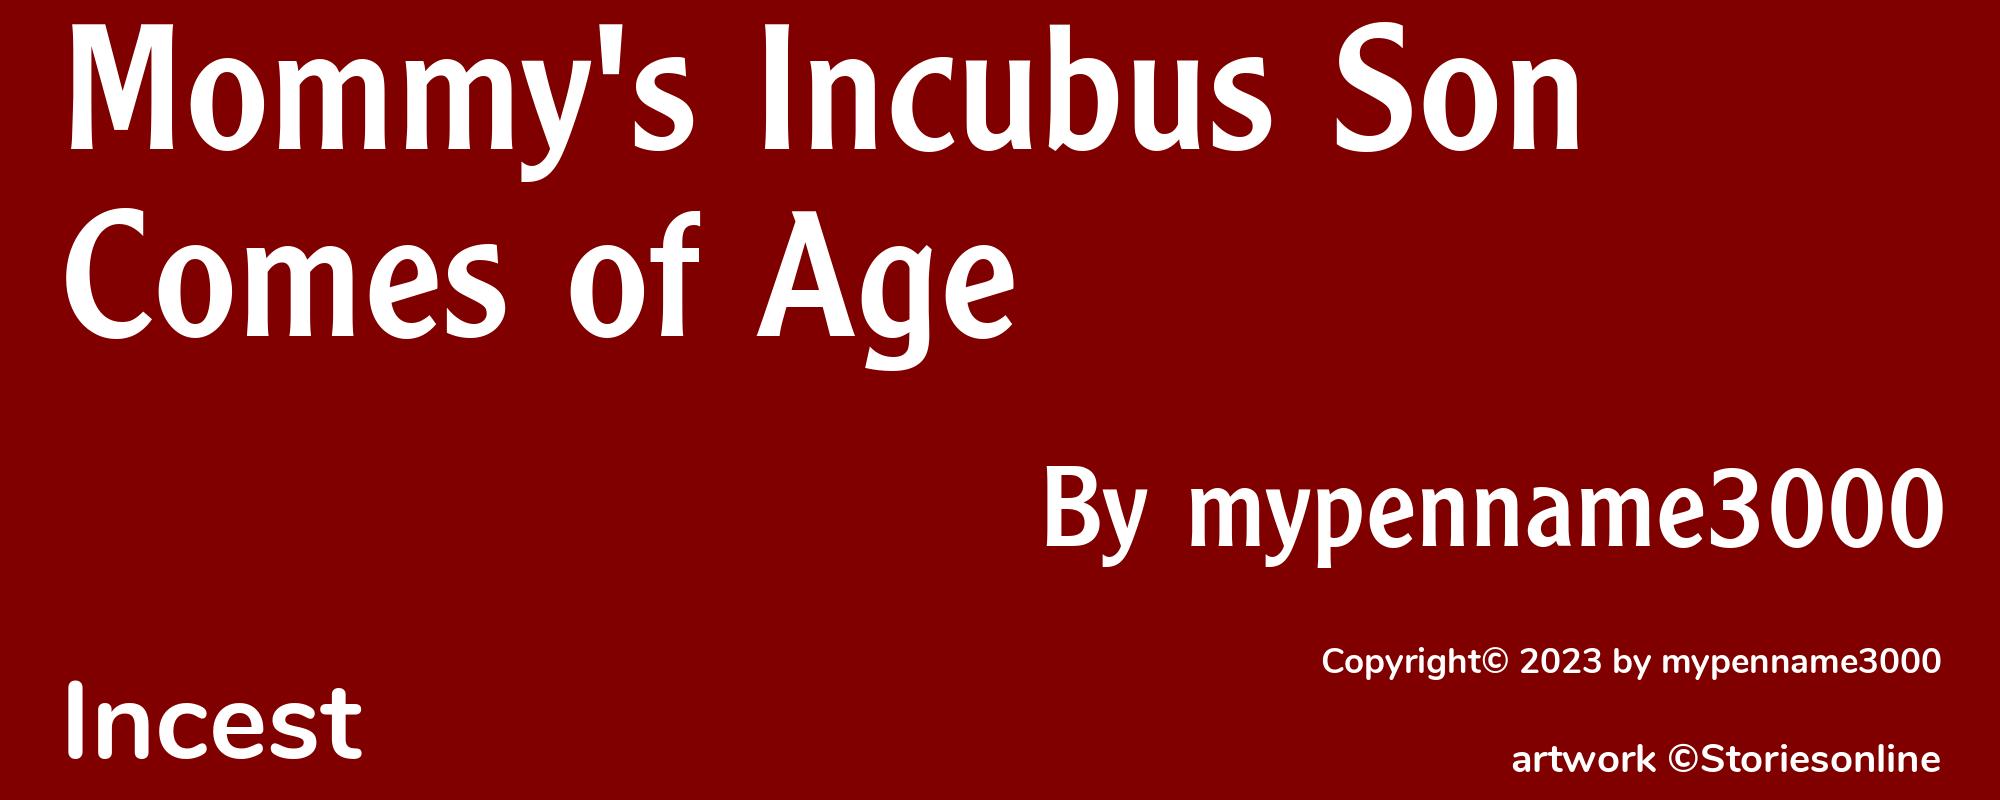 Mommy's Incubus Son Comes of Age - Cover